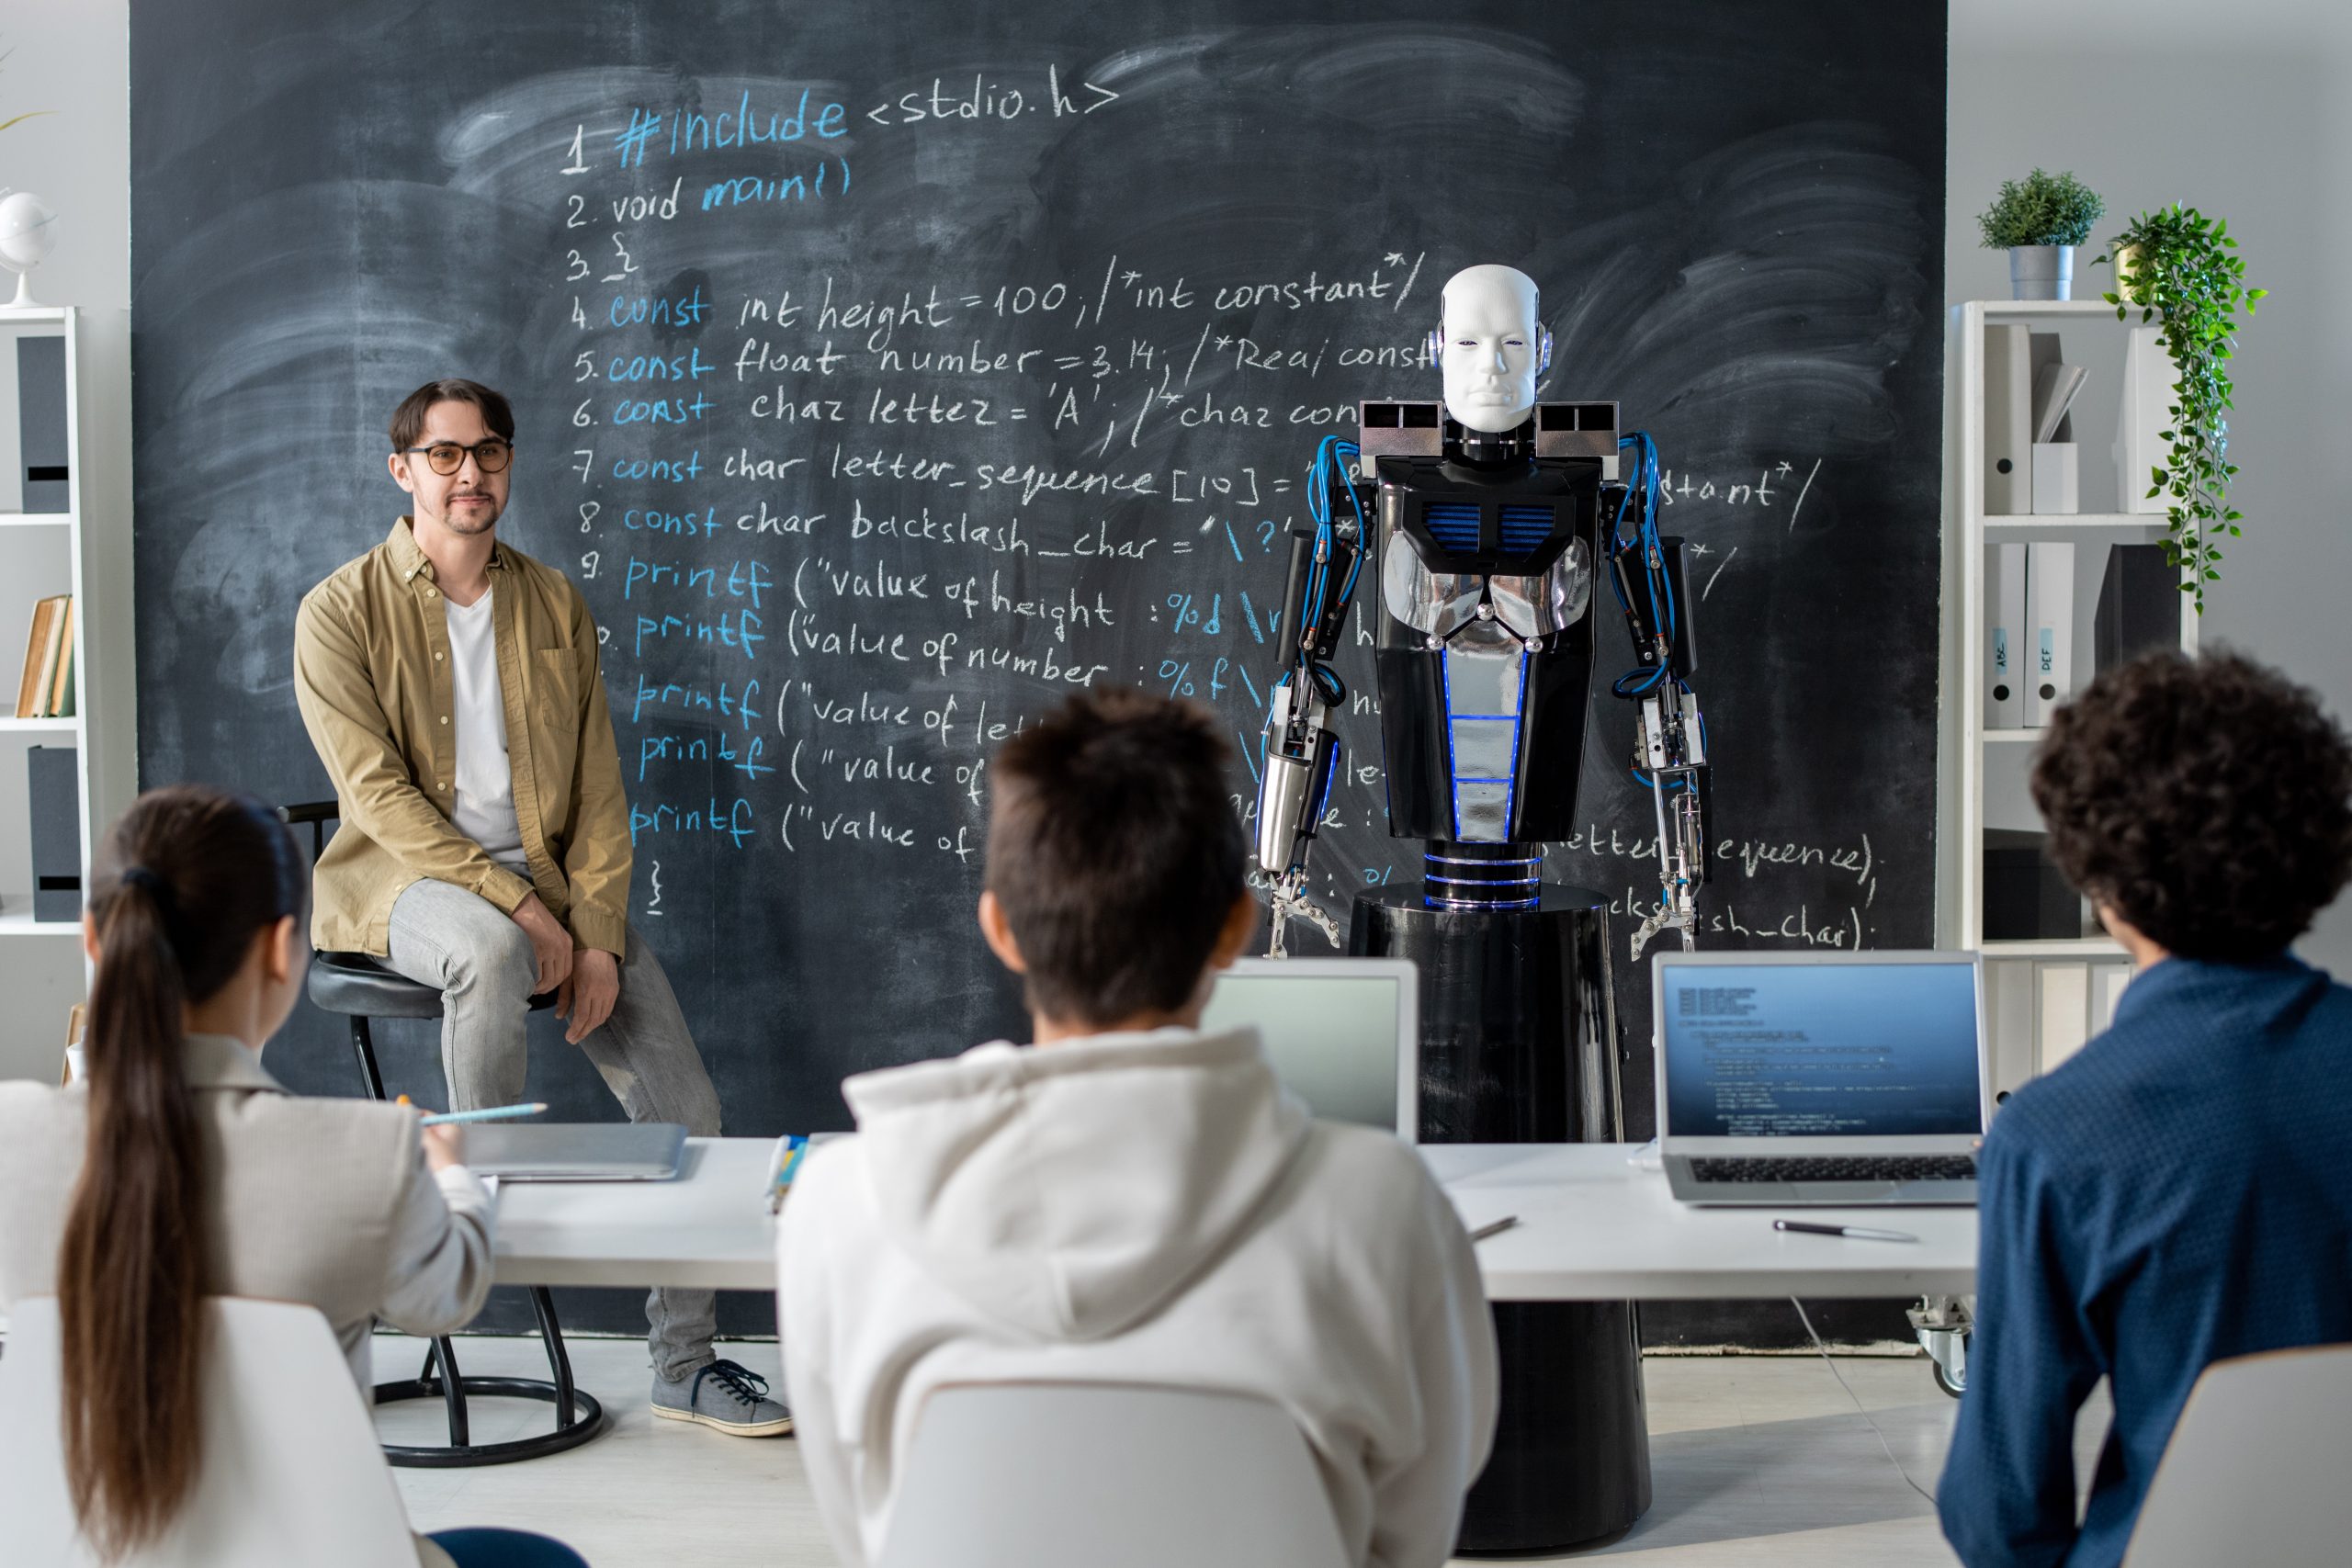 Why is robotics education important?